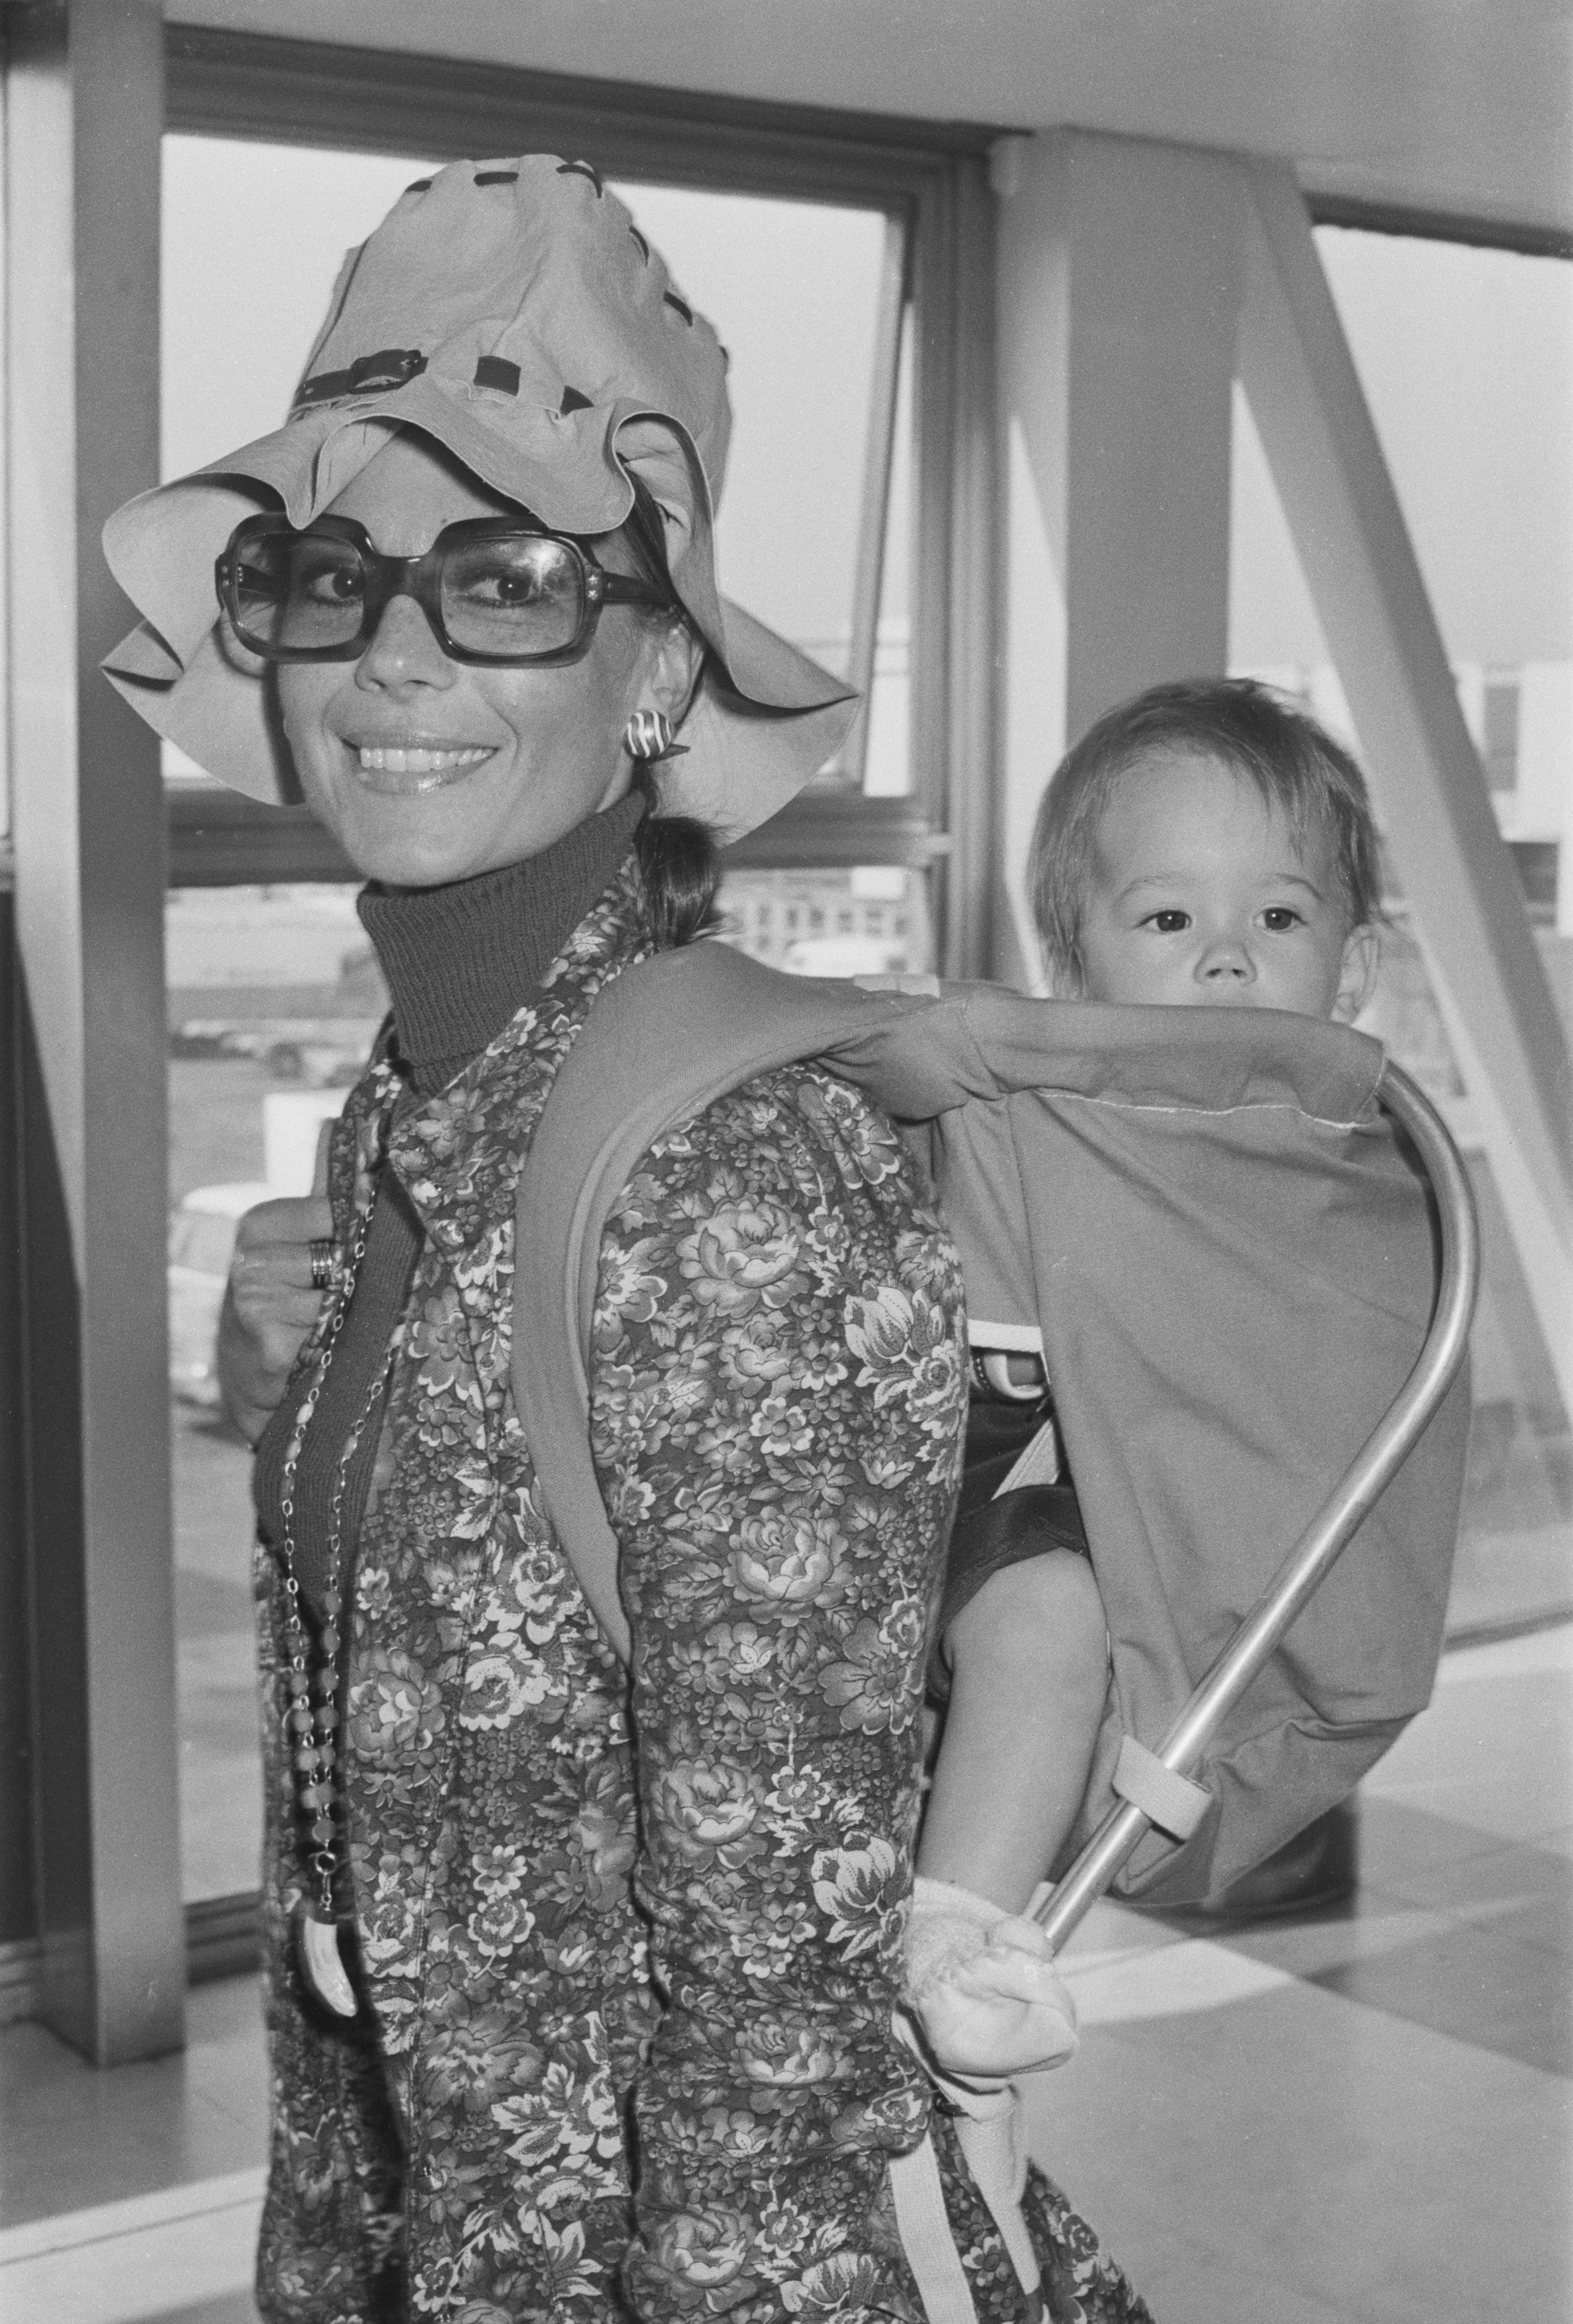 American actress Natalie Wood (1938 - 1981) with her daughter Natasha Gregson Wagner in the UK on September 21, 1971. | Source: Getty Images